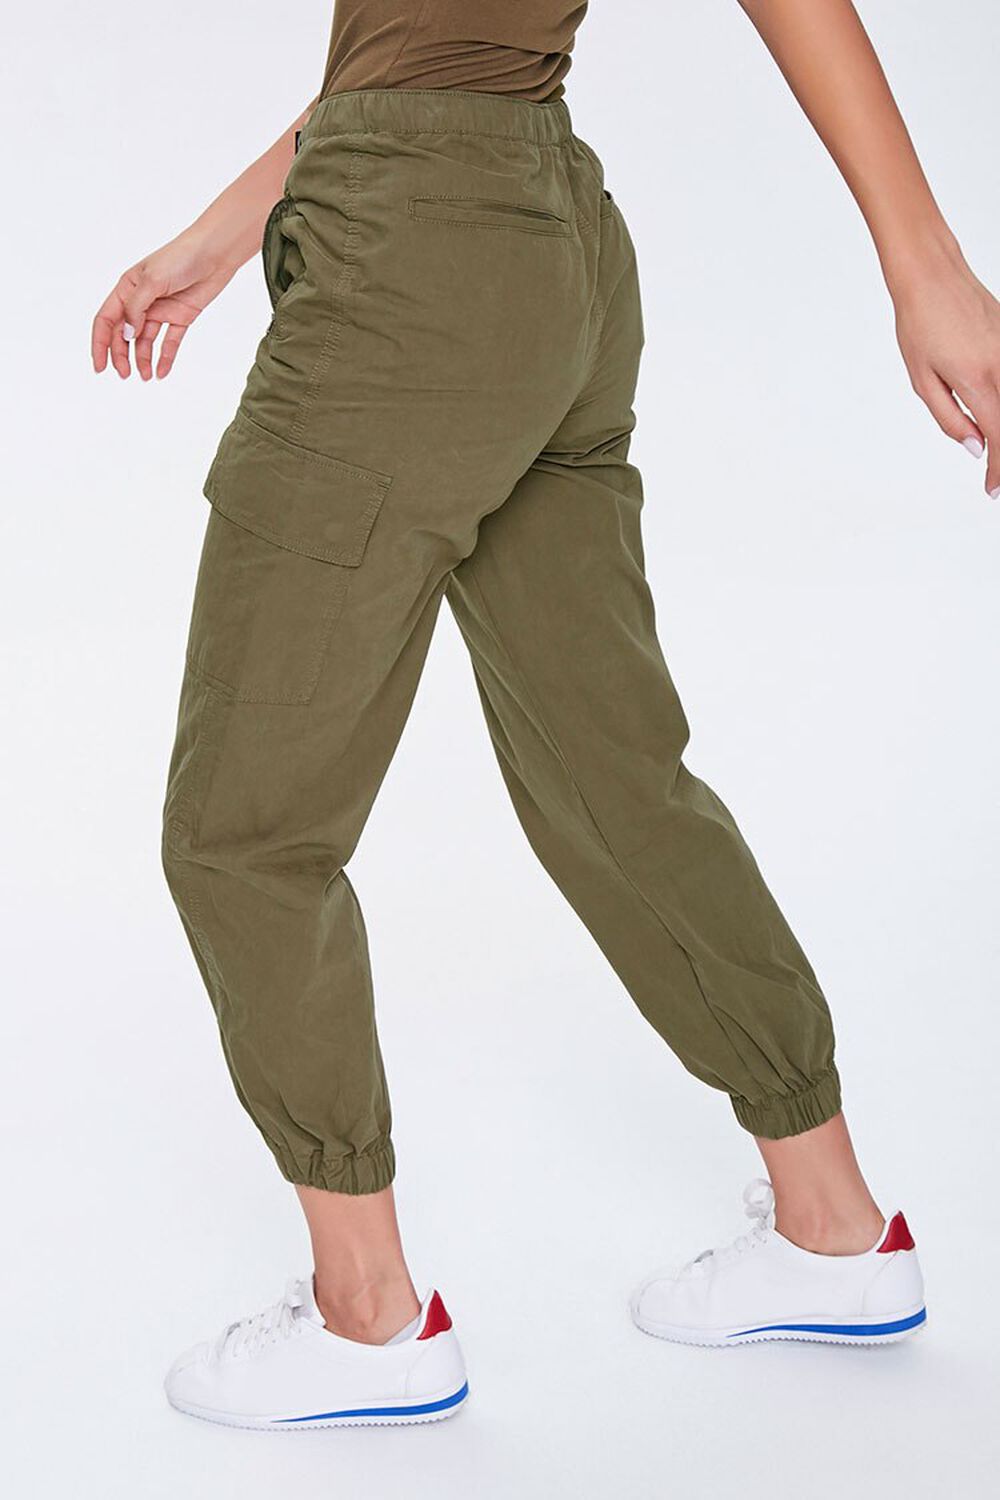 OLIVE Buckled Cargo Ankle Joggers, image 3